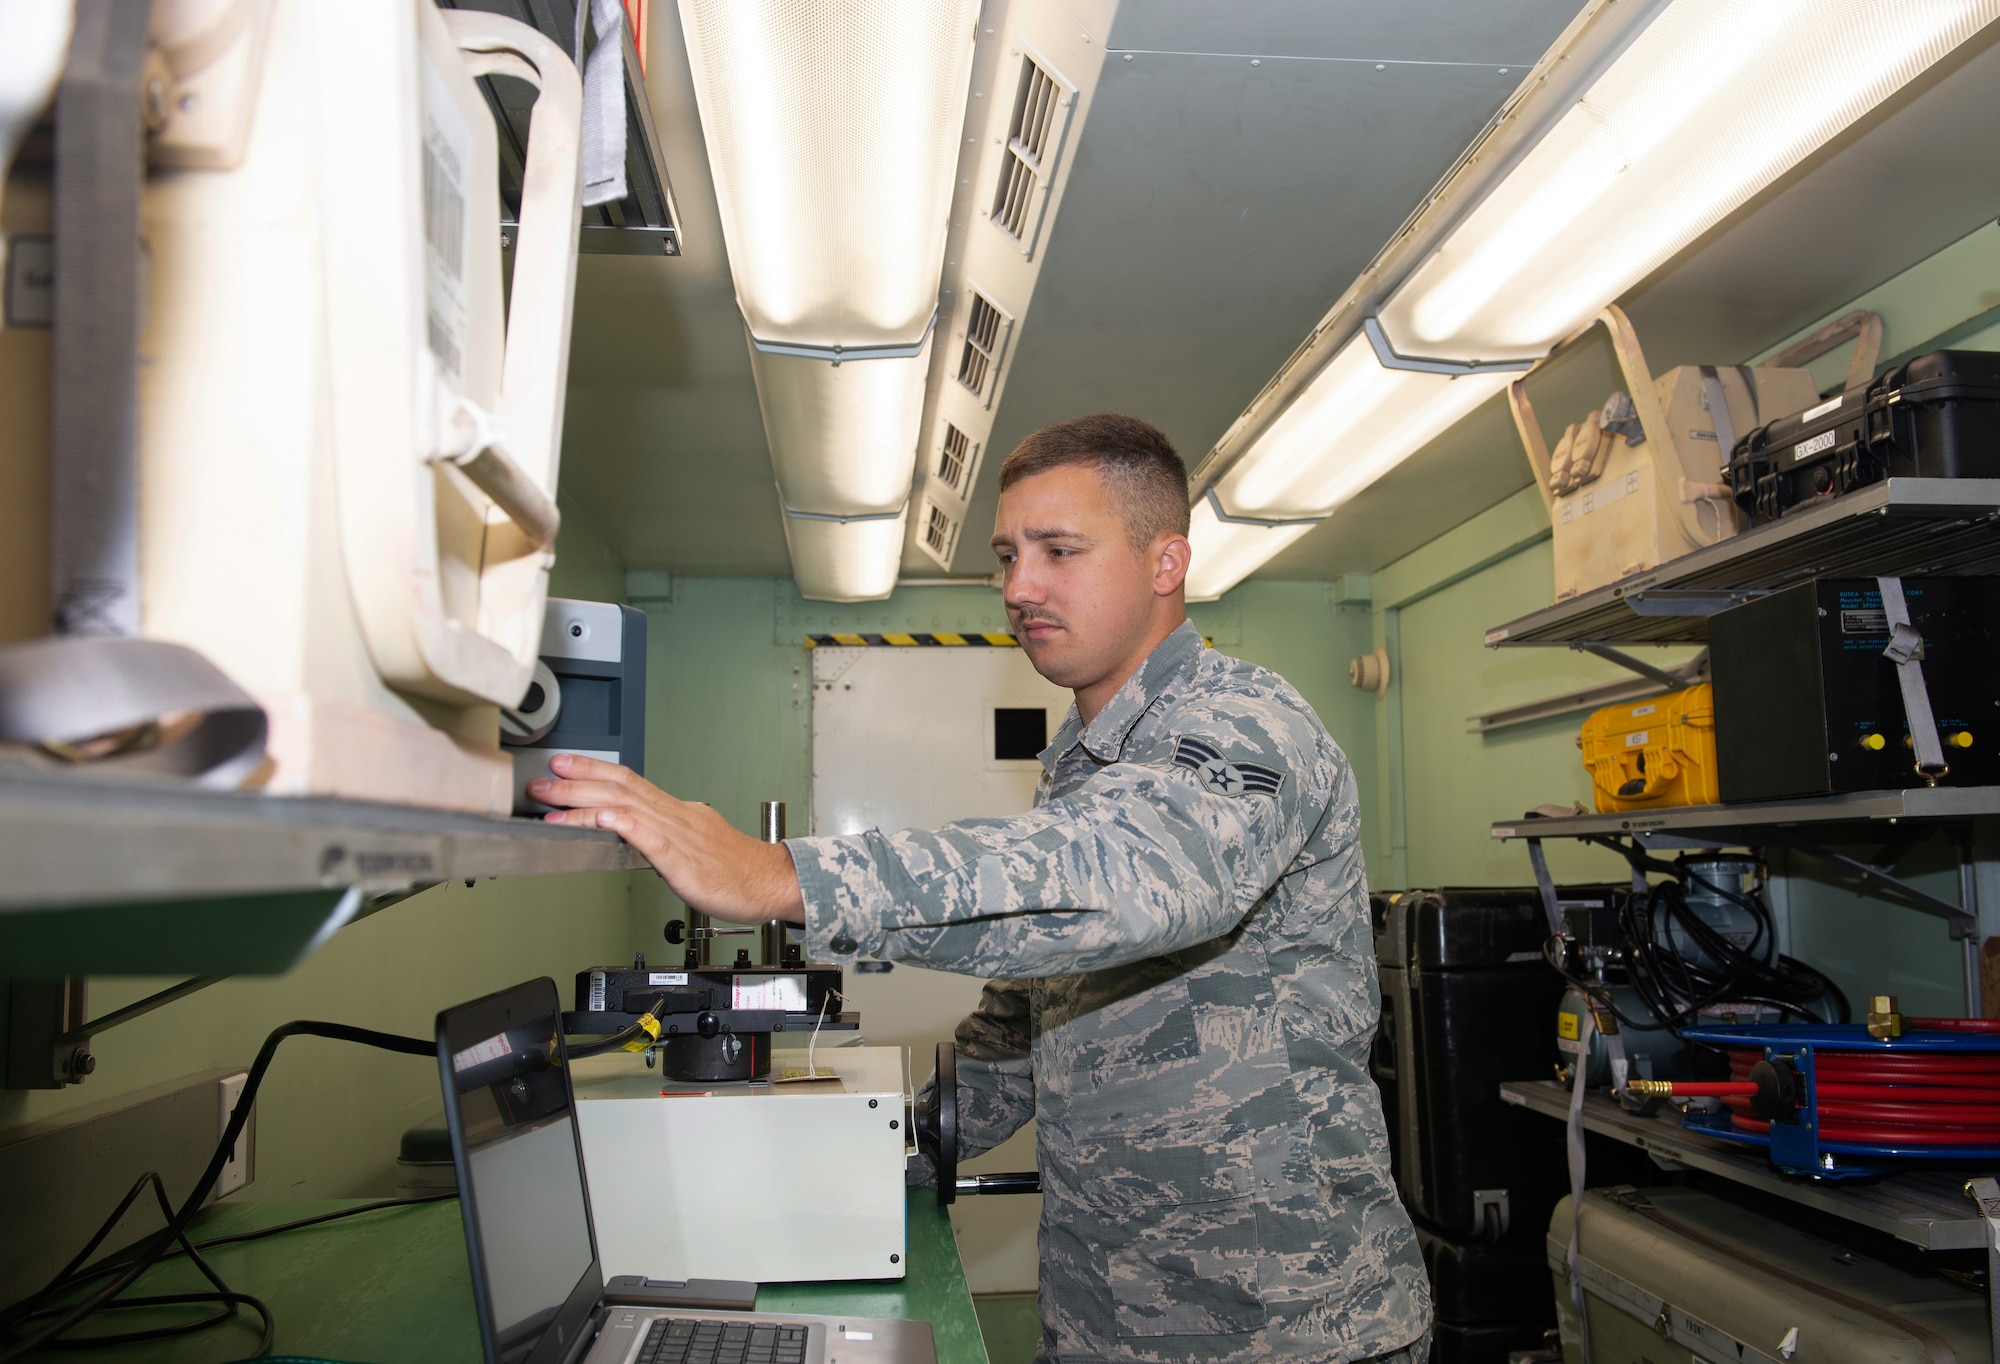 Senior Airman Jeremy Evans, a precision measurement equipment laboratory (PMEL) journeyman assigned to the 4th Component Maintenance Squadron at Seymour Johnson Air Force Base (AFB), North Carolina, checks a torque calibration station within a tactical shelter unit on May 6, 2019, at Offutt AFB, Nebraska. Evans is one of five PMEL experts sent here to set up the Rapid Assistance Support for Calibration to restore Offutt’s capability to calibrate equipment, which was lost in the flood earlier this year. (U.S. Air Force photo by L. Cunningham)